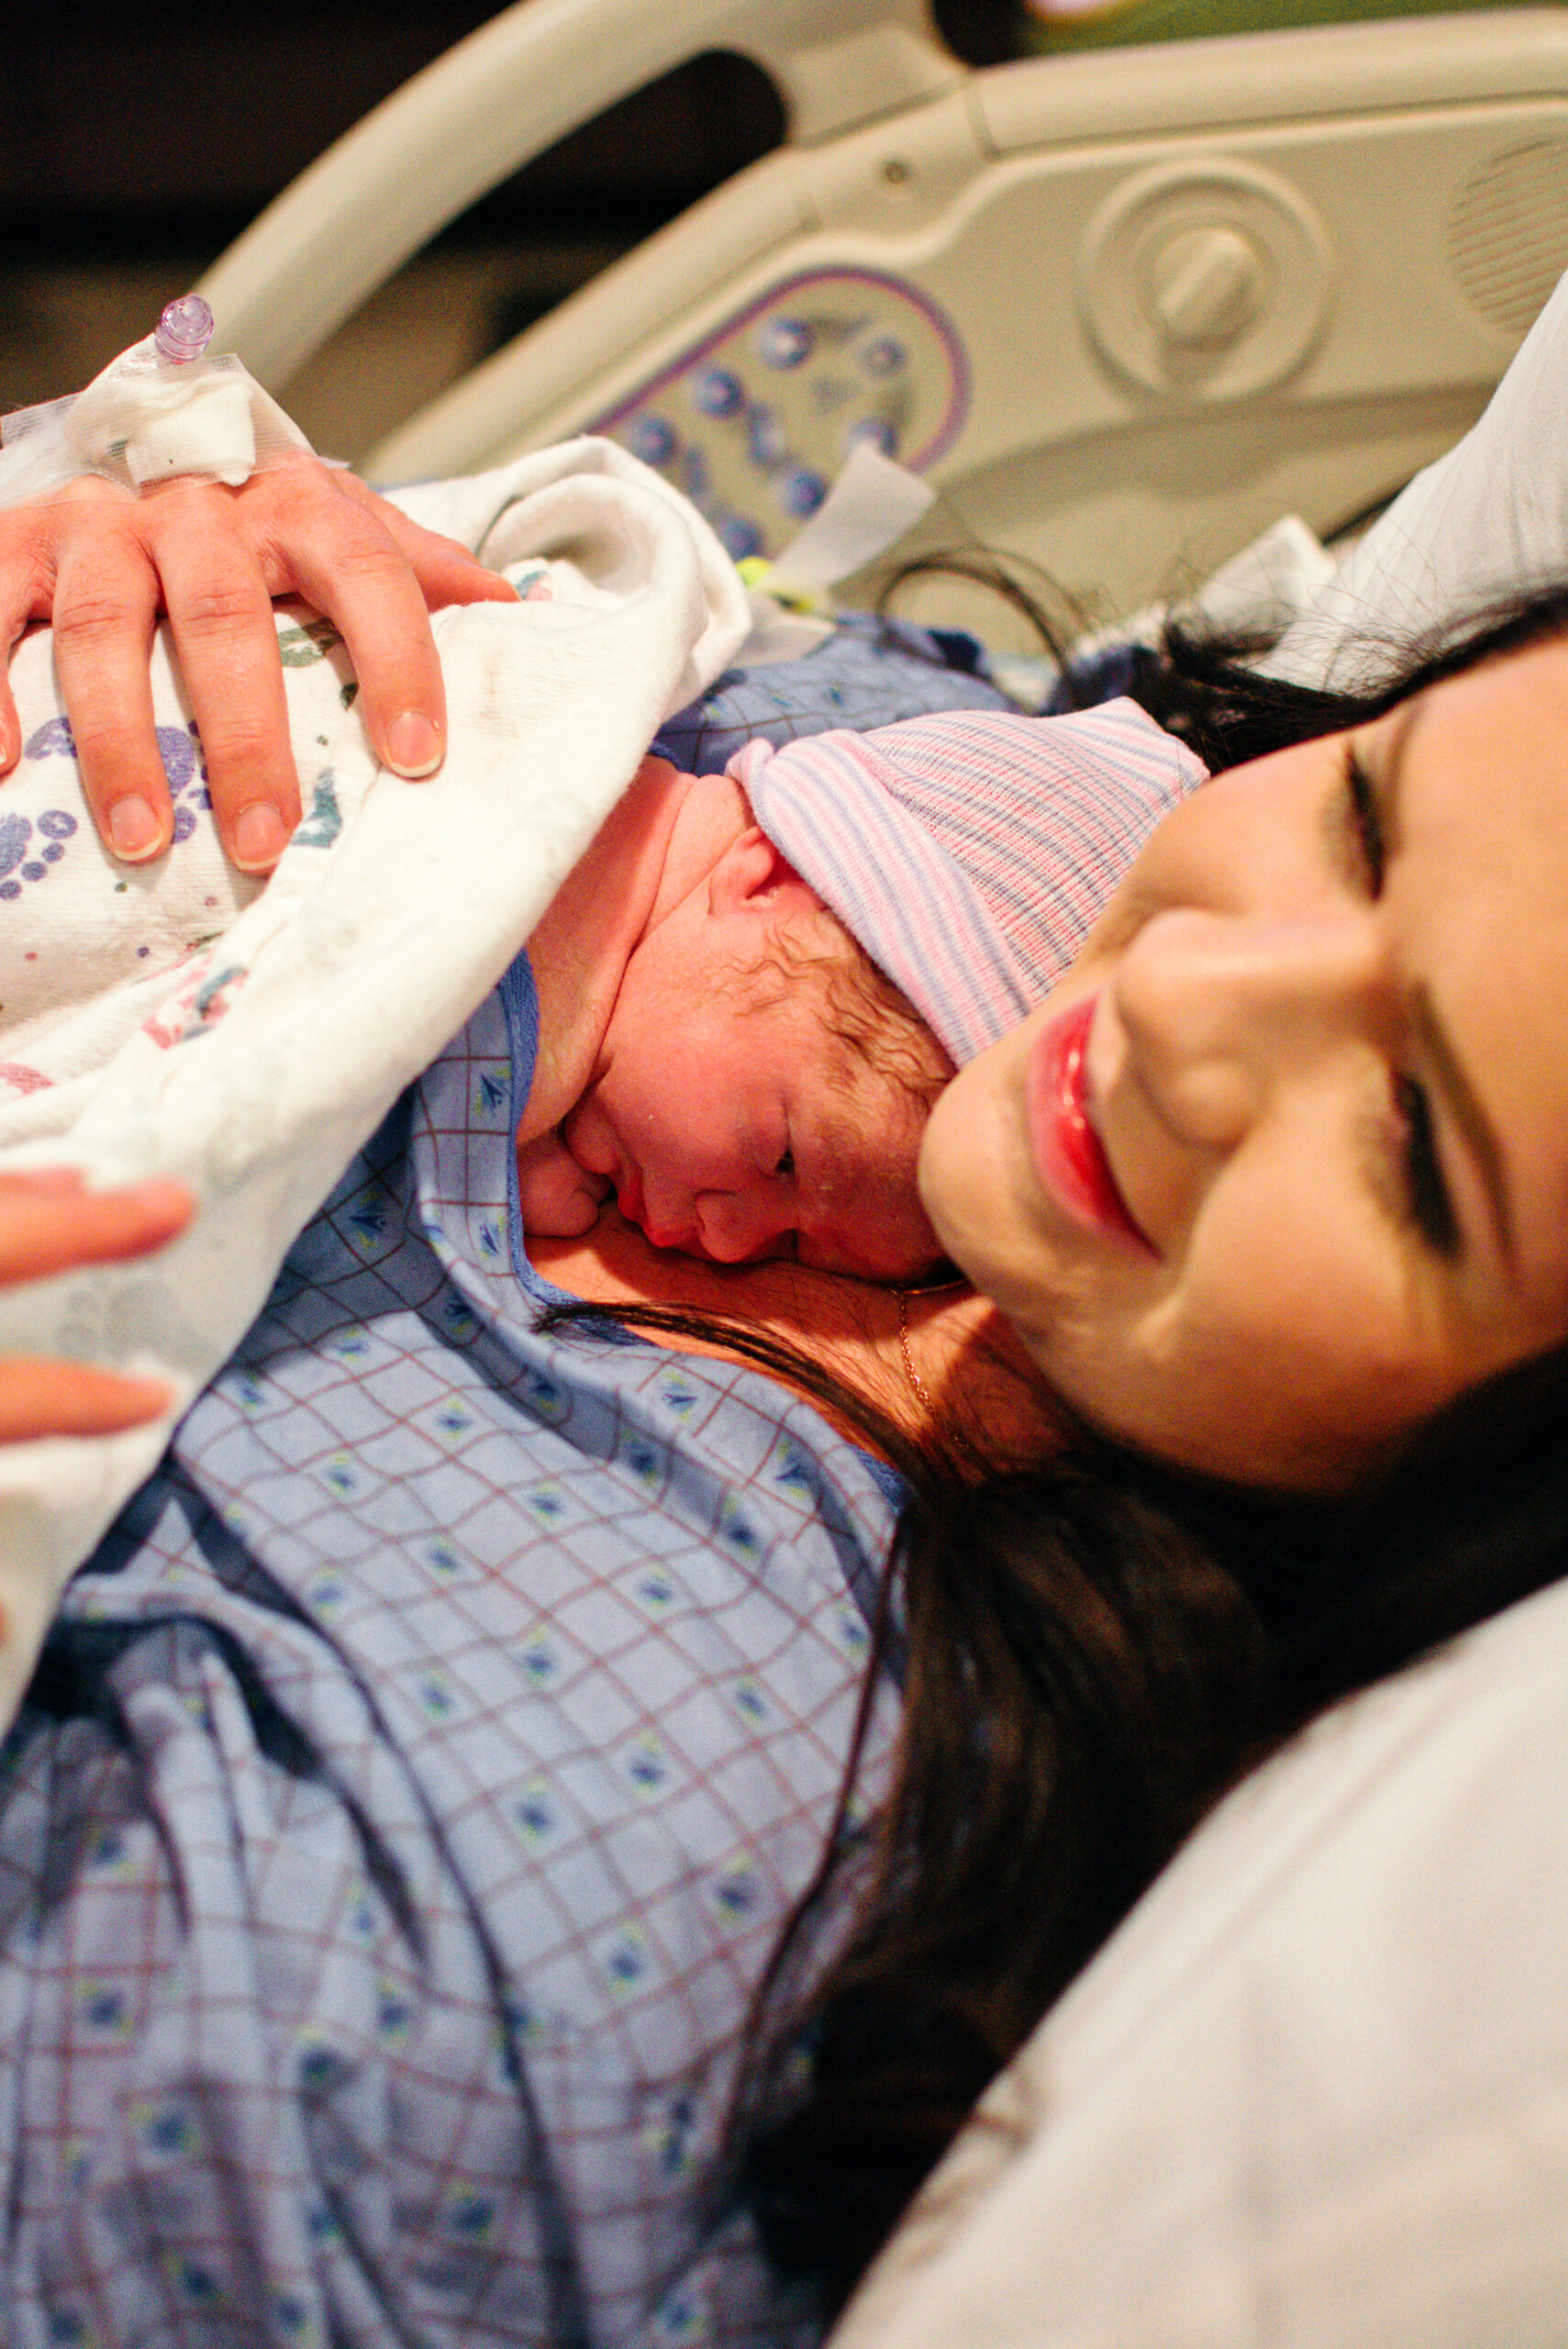 Woman holds newborn baby in hospital bed right after giving birth.